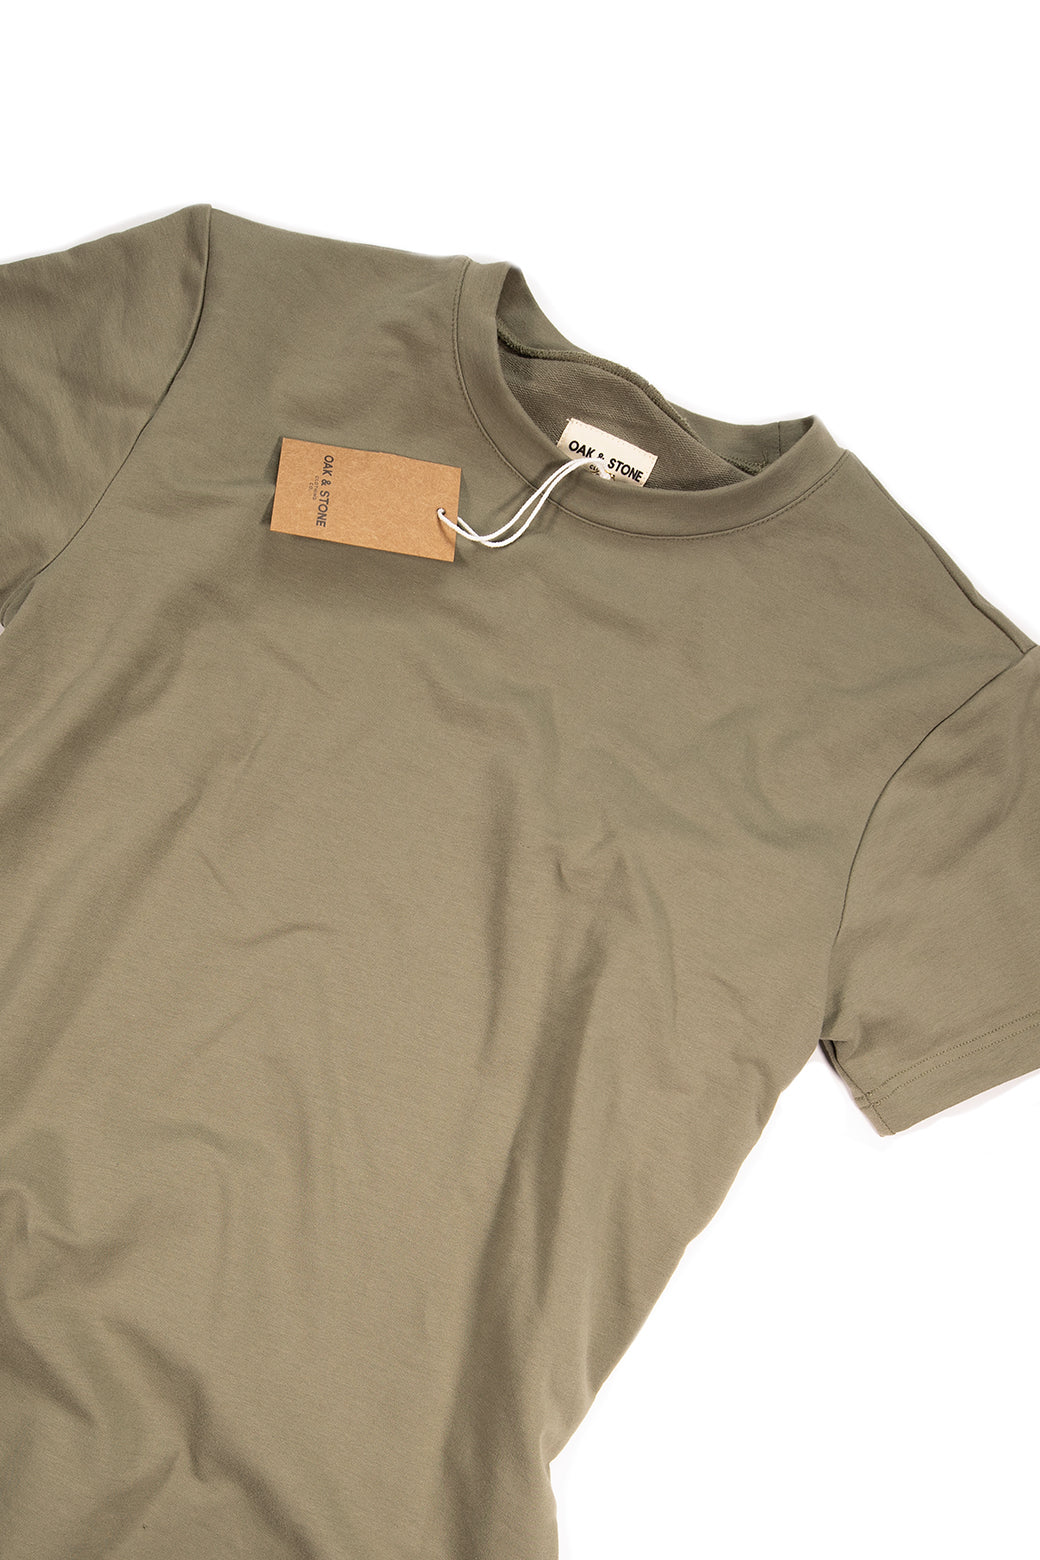 The Classic S/S Tee - Olive